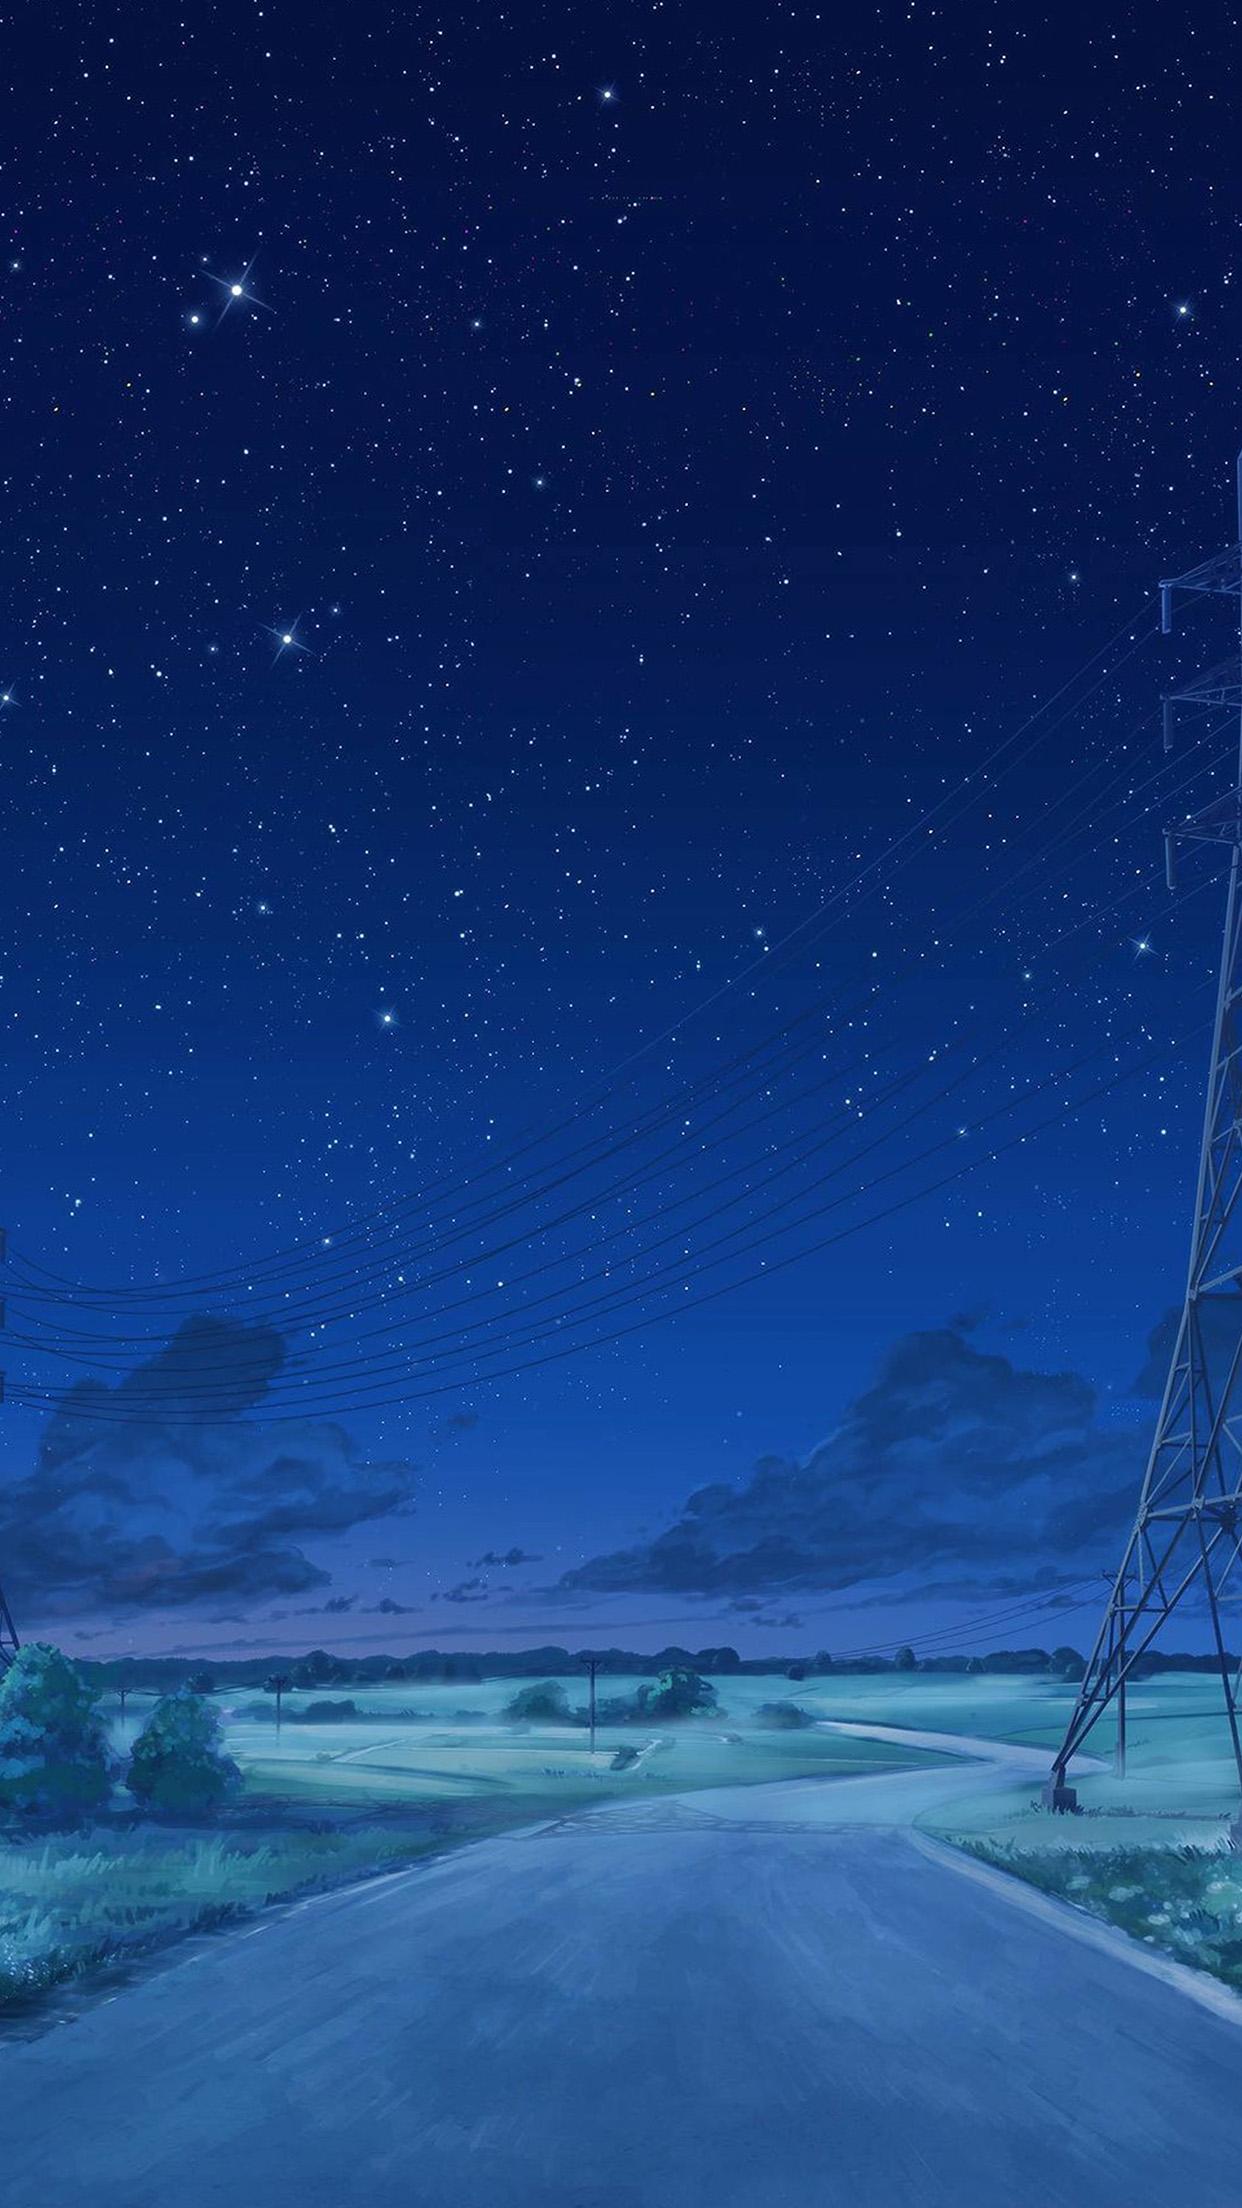 Anime Sky Stock Photos, Images and Backgrounds for Free Download